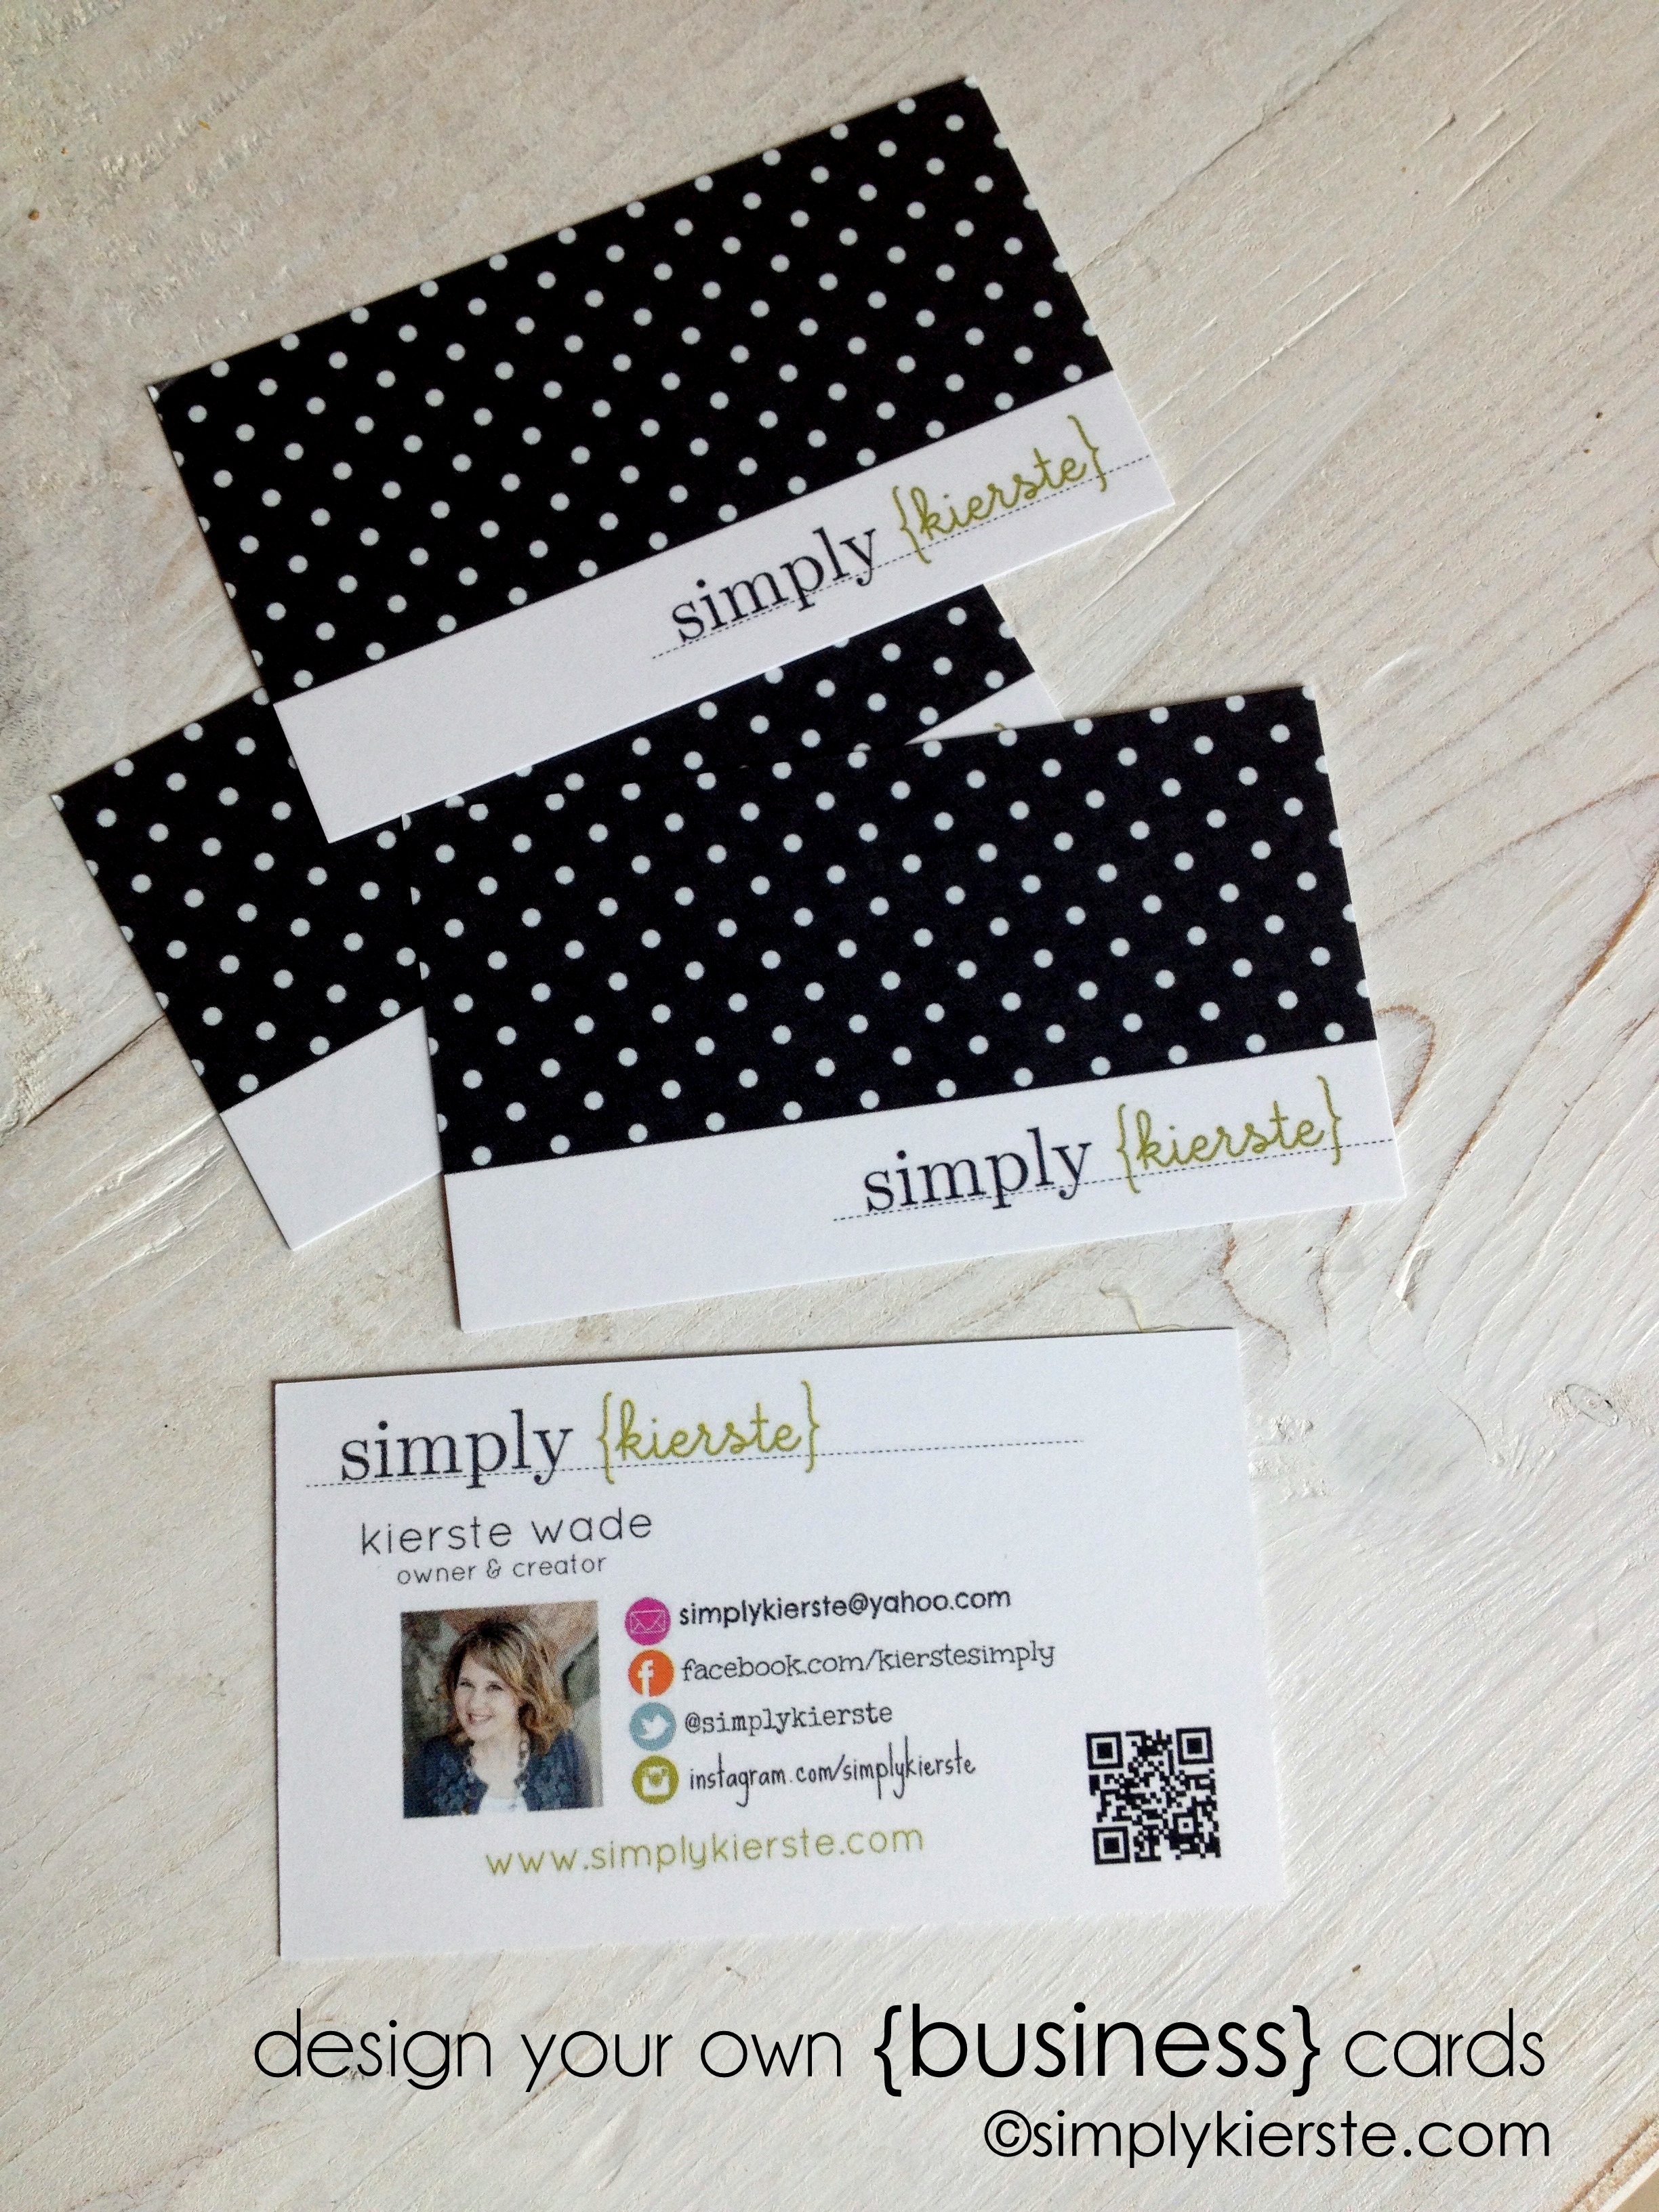 how-to-design-your-own-business-cards-simplykierste